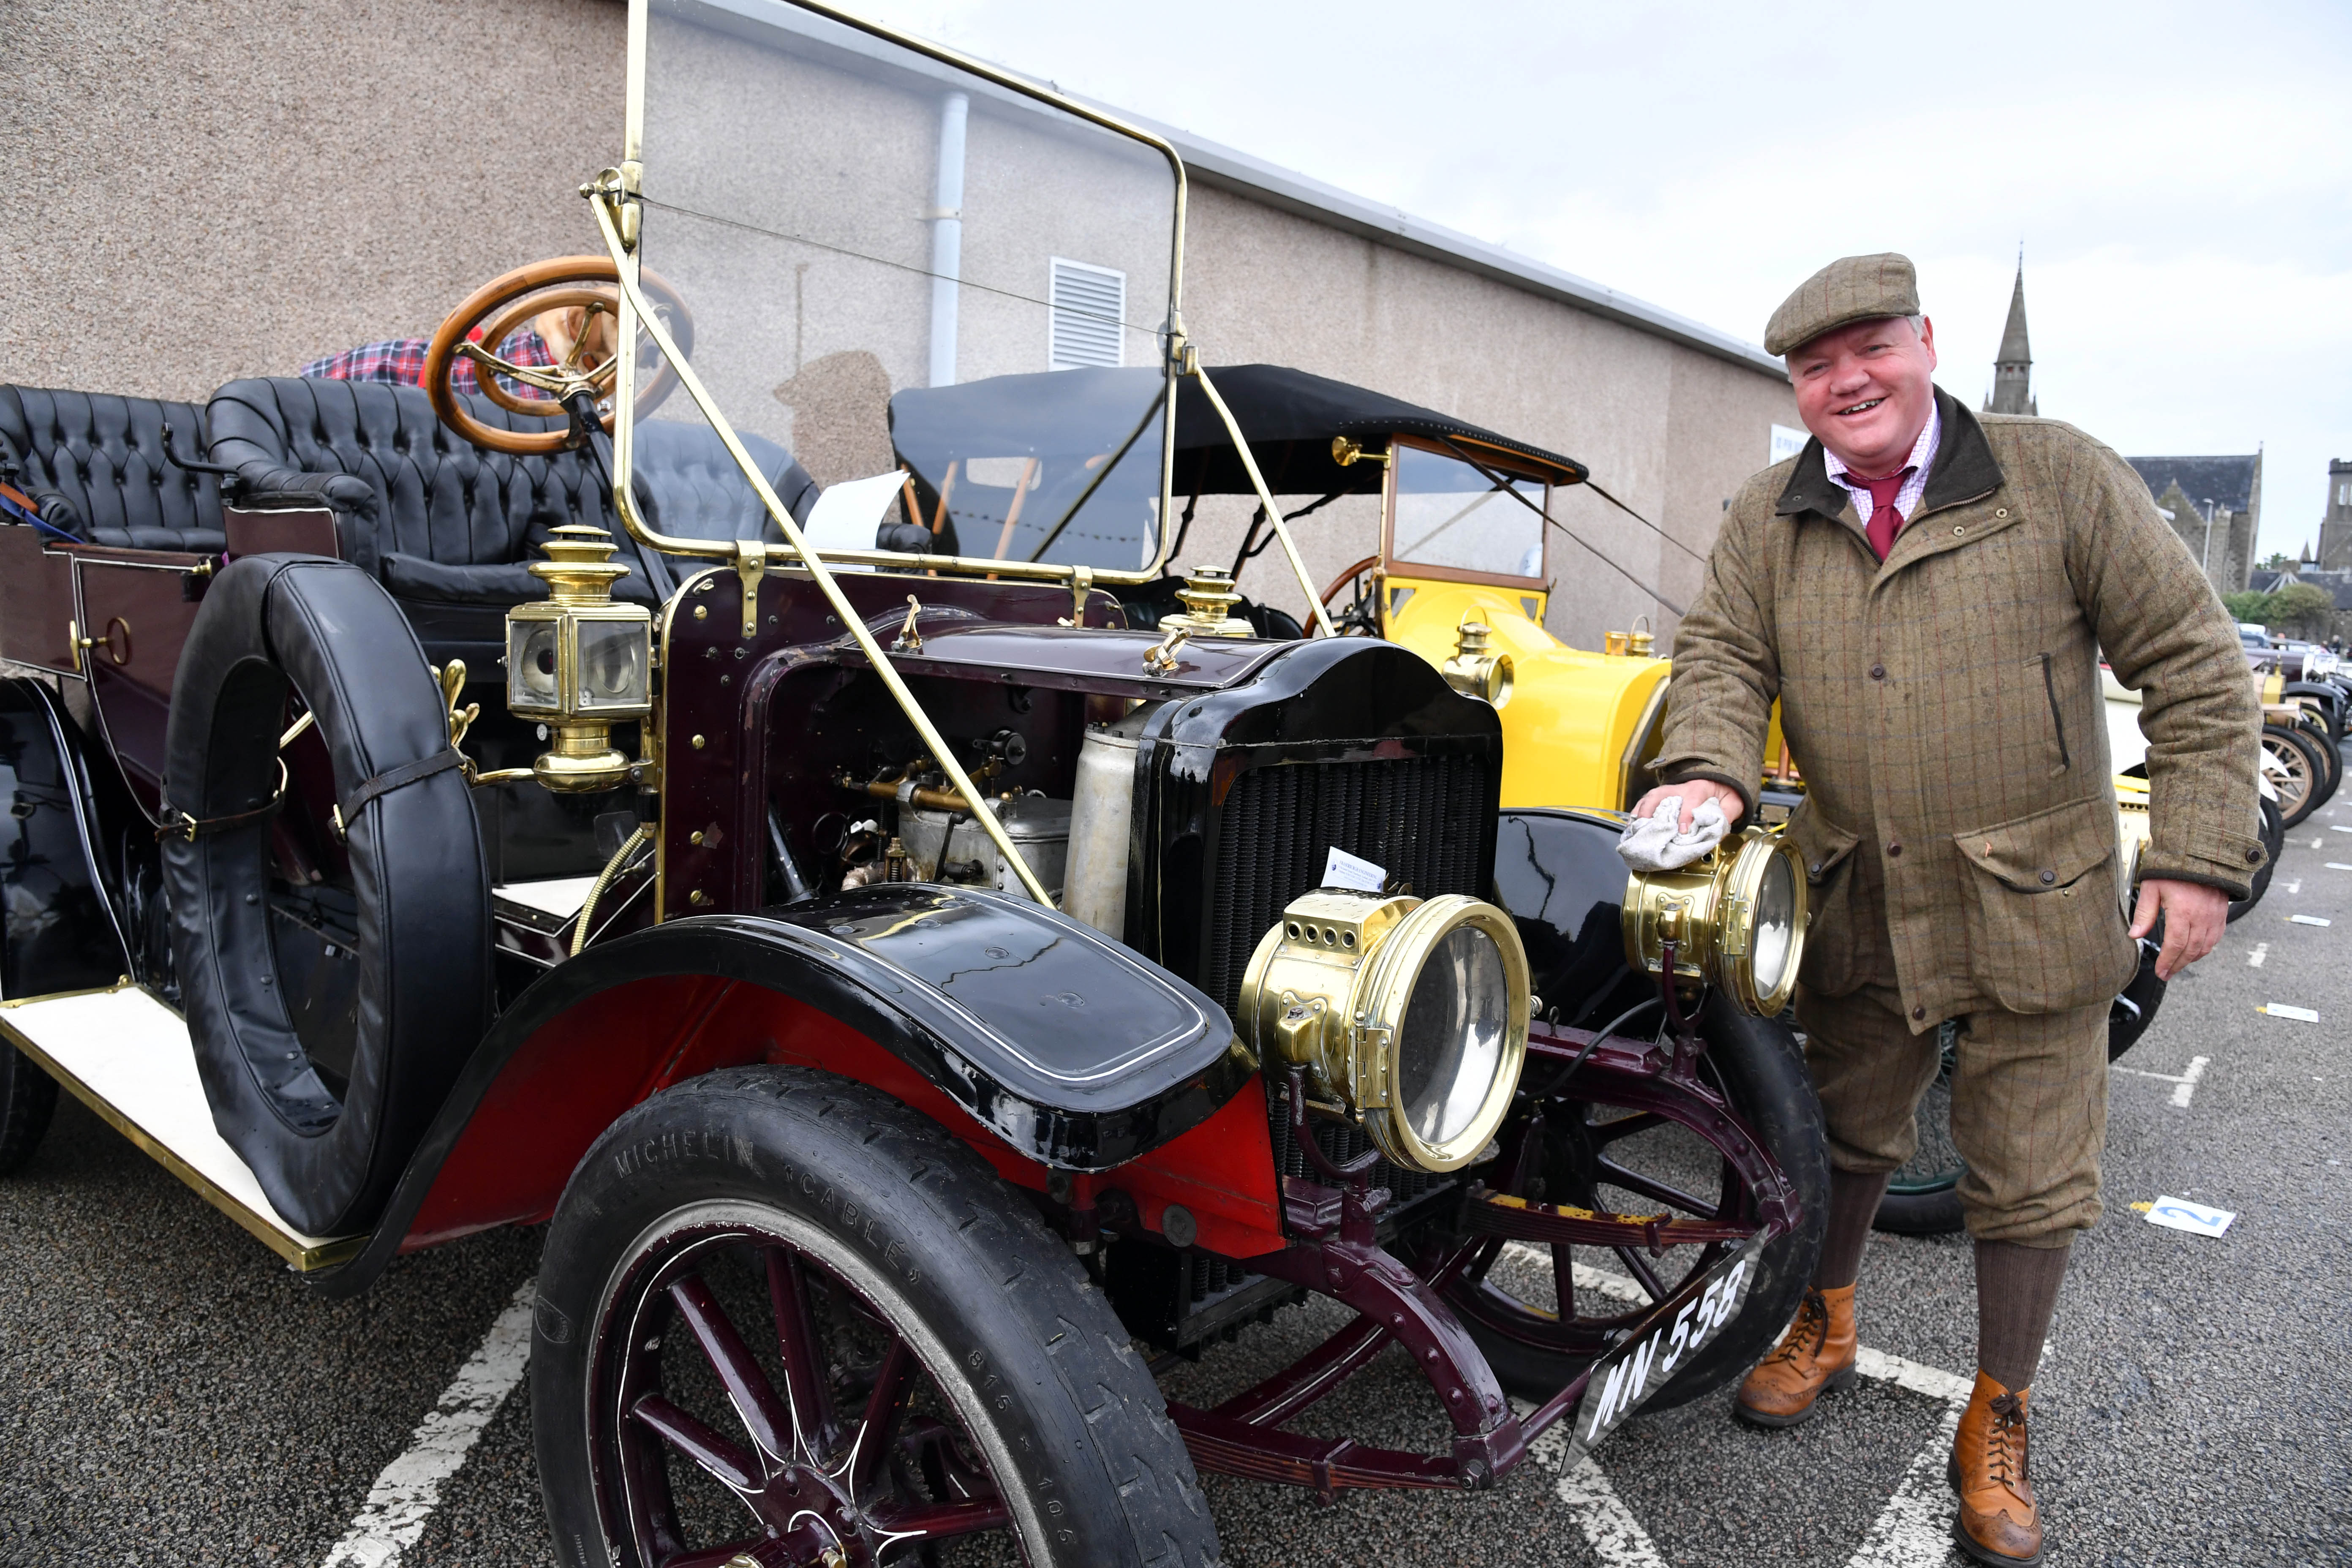 Owner Alfie Cheyne polishes the brass headlamps on his 1910 Whye steam car.